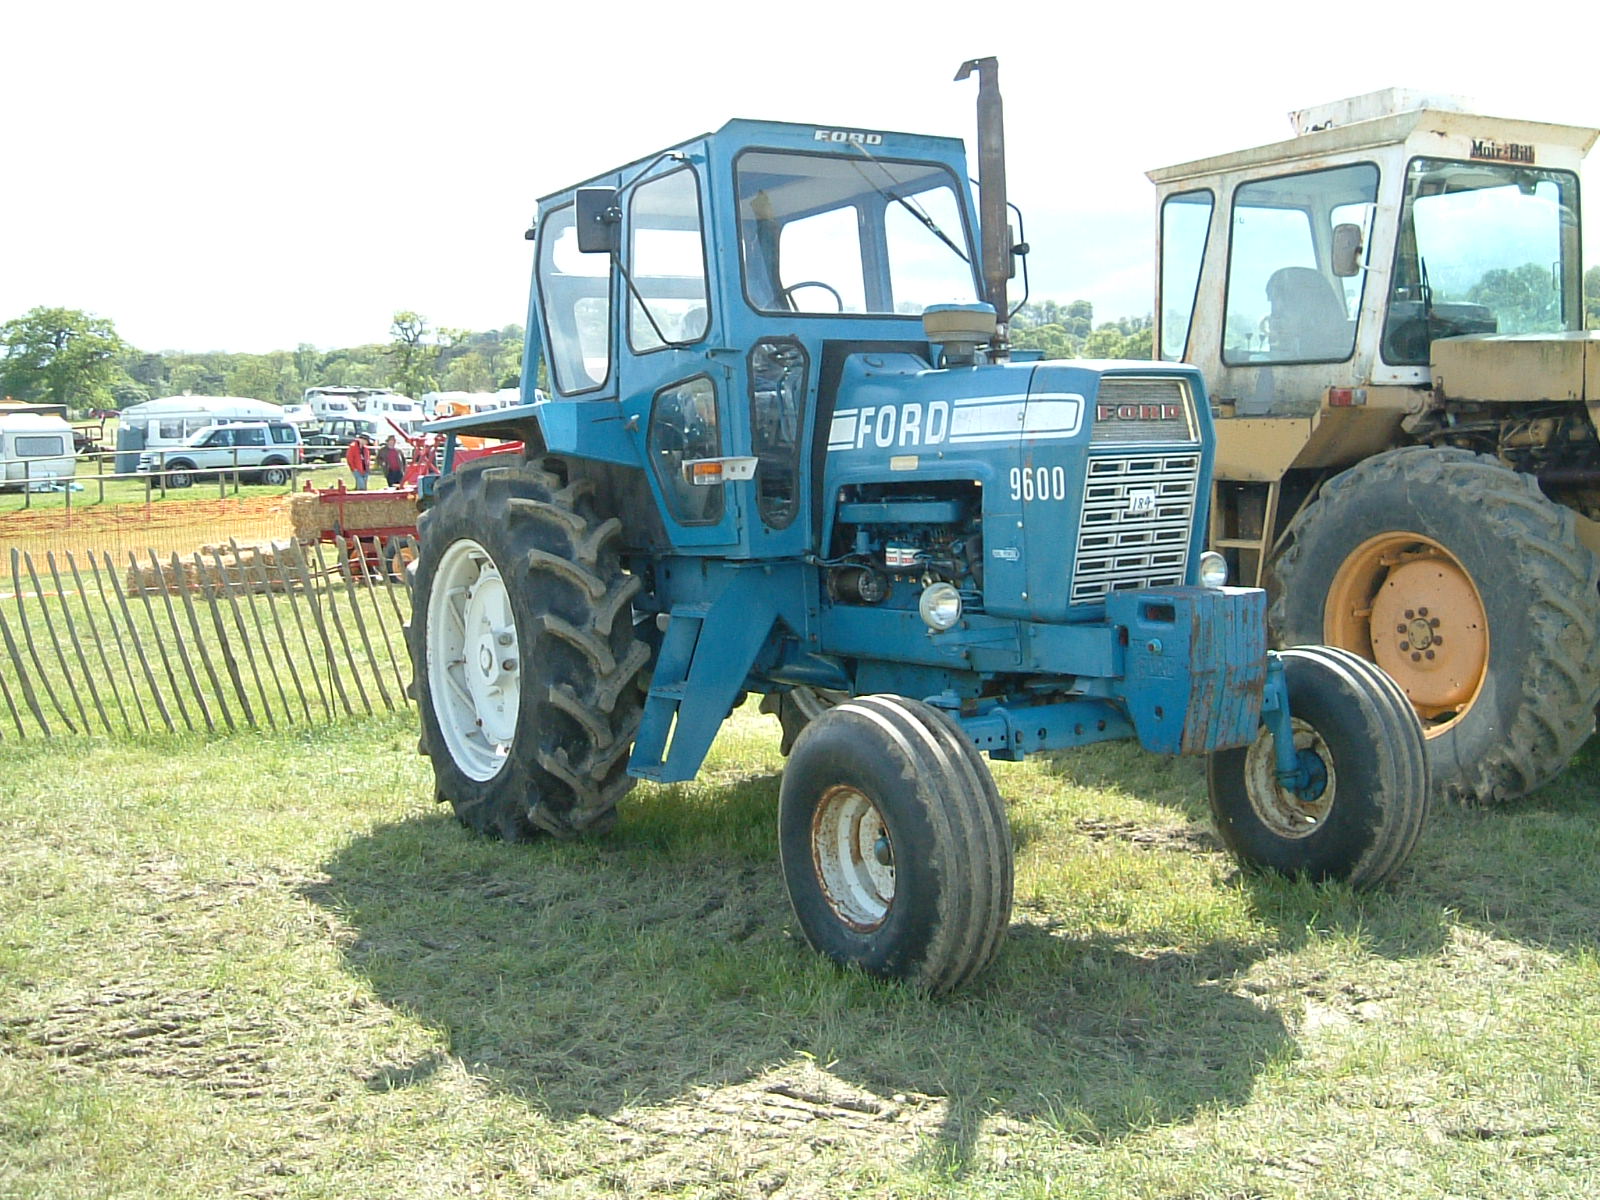 Ford 9600